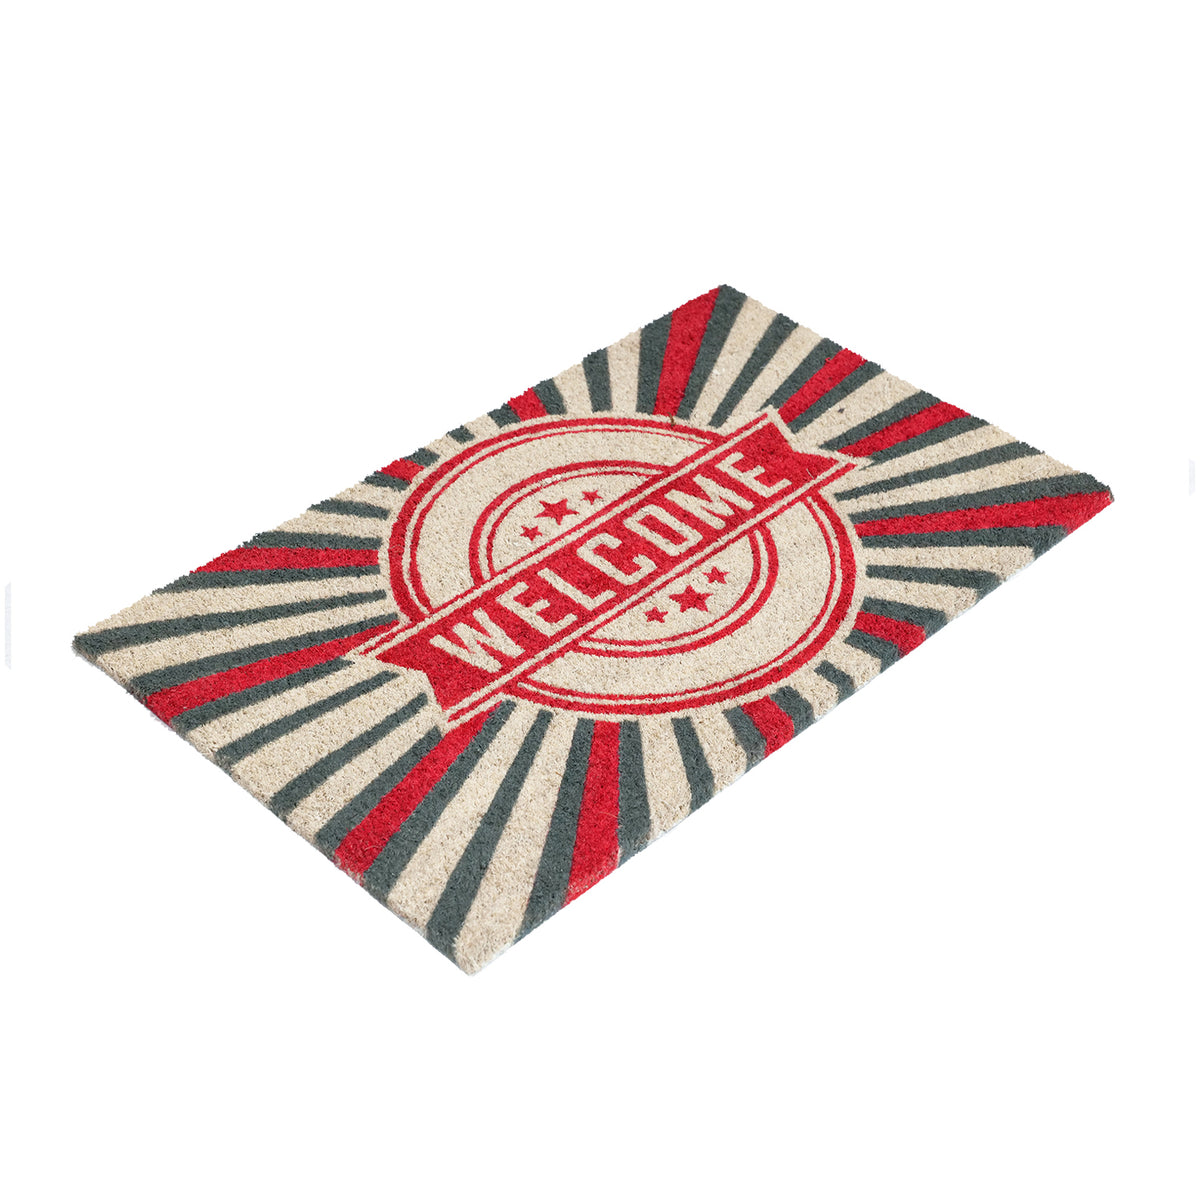 OnlyMat Retro WELCOME Red and Grey Printed Natural Coir Entrance Mat